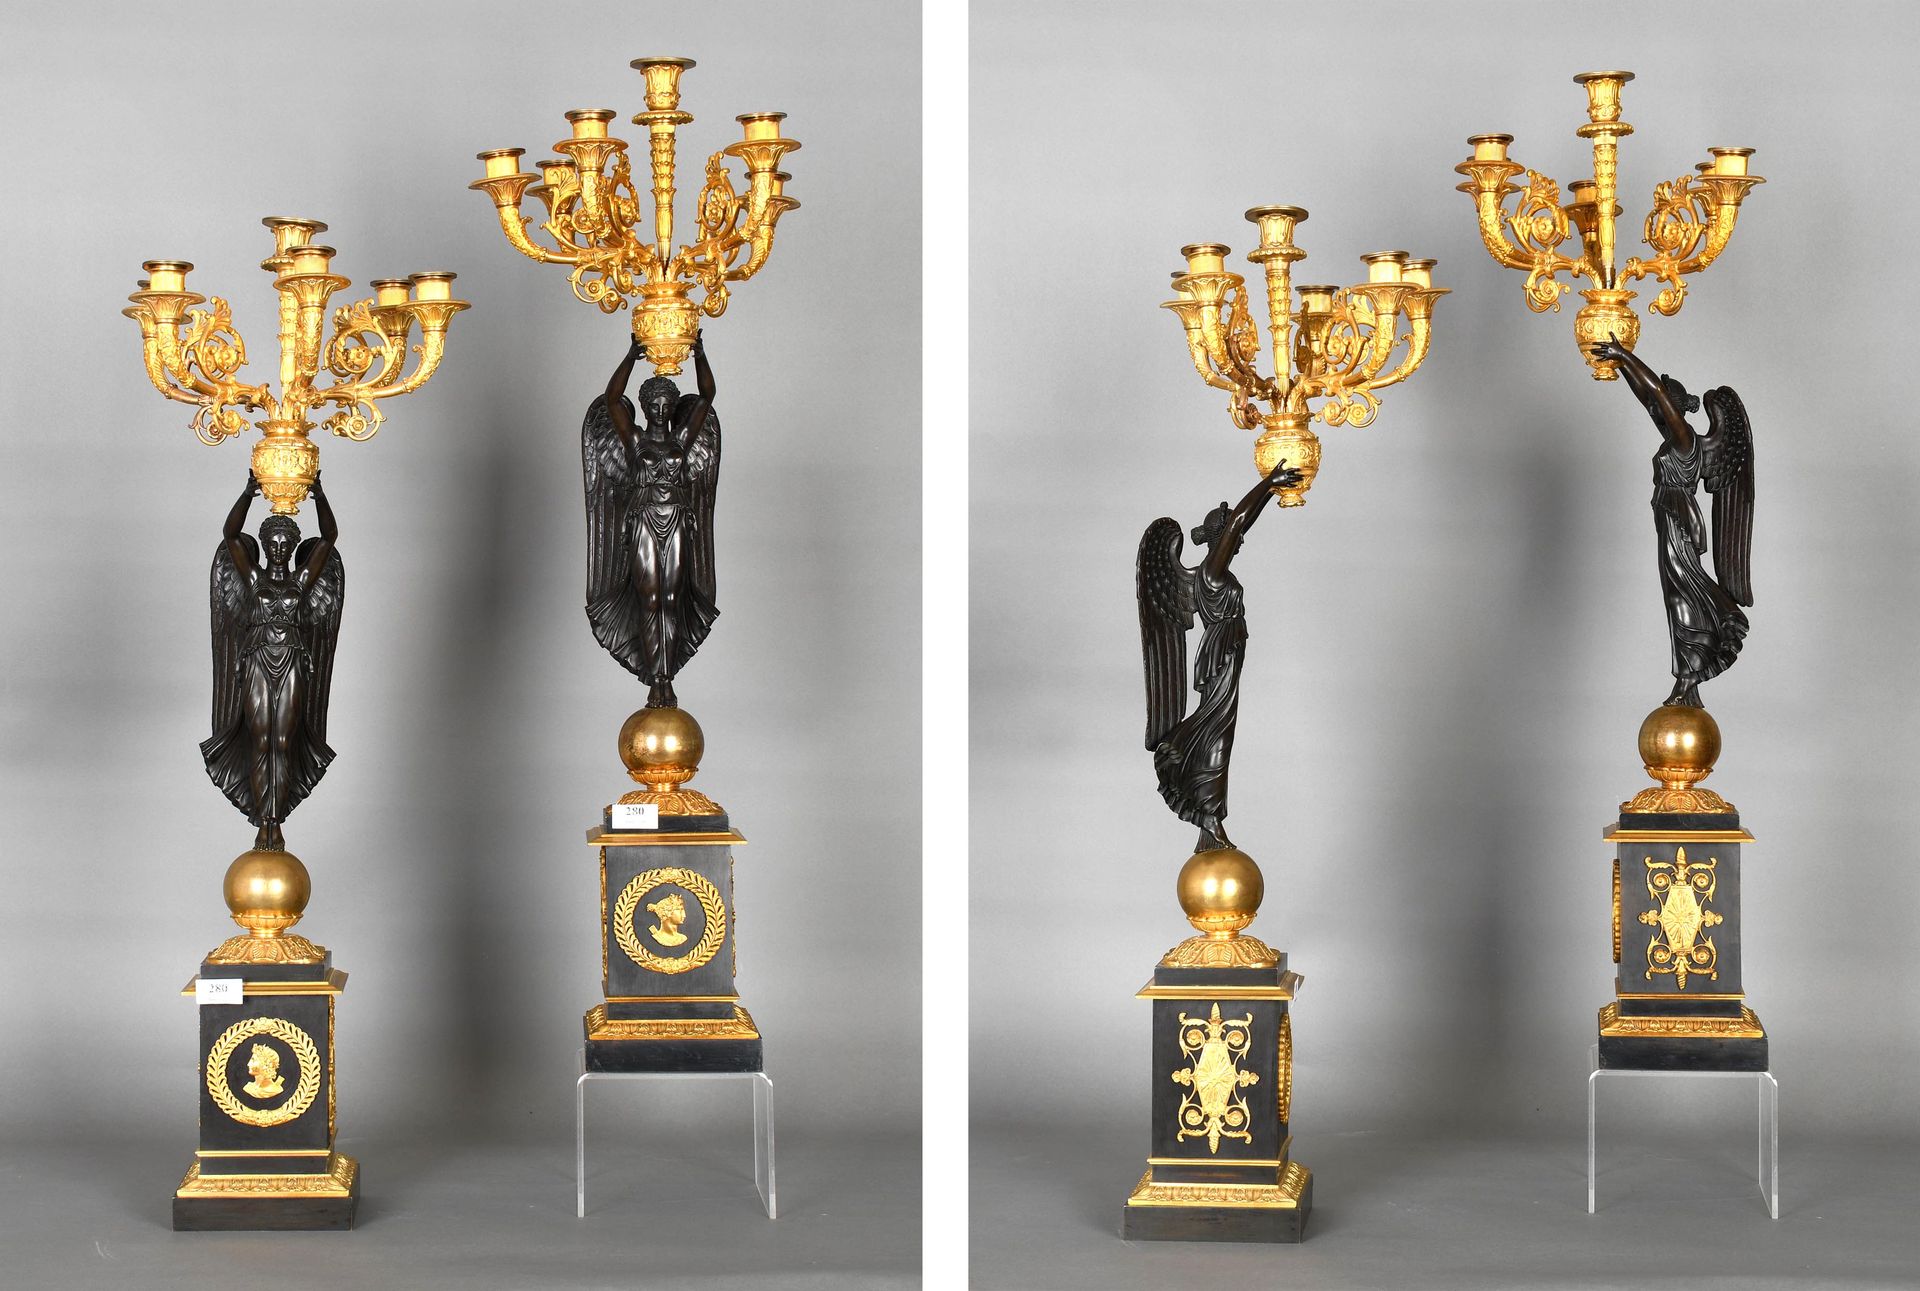 Null Attributed to Thomire
Pair of Empire period candelabras in patinated and gi&hellip;